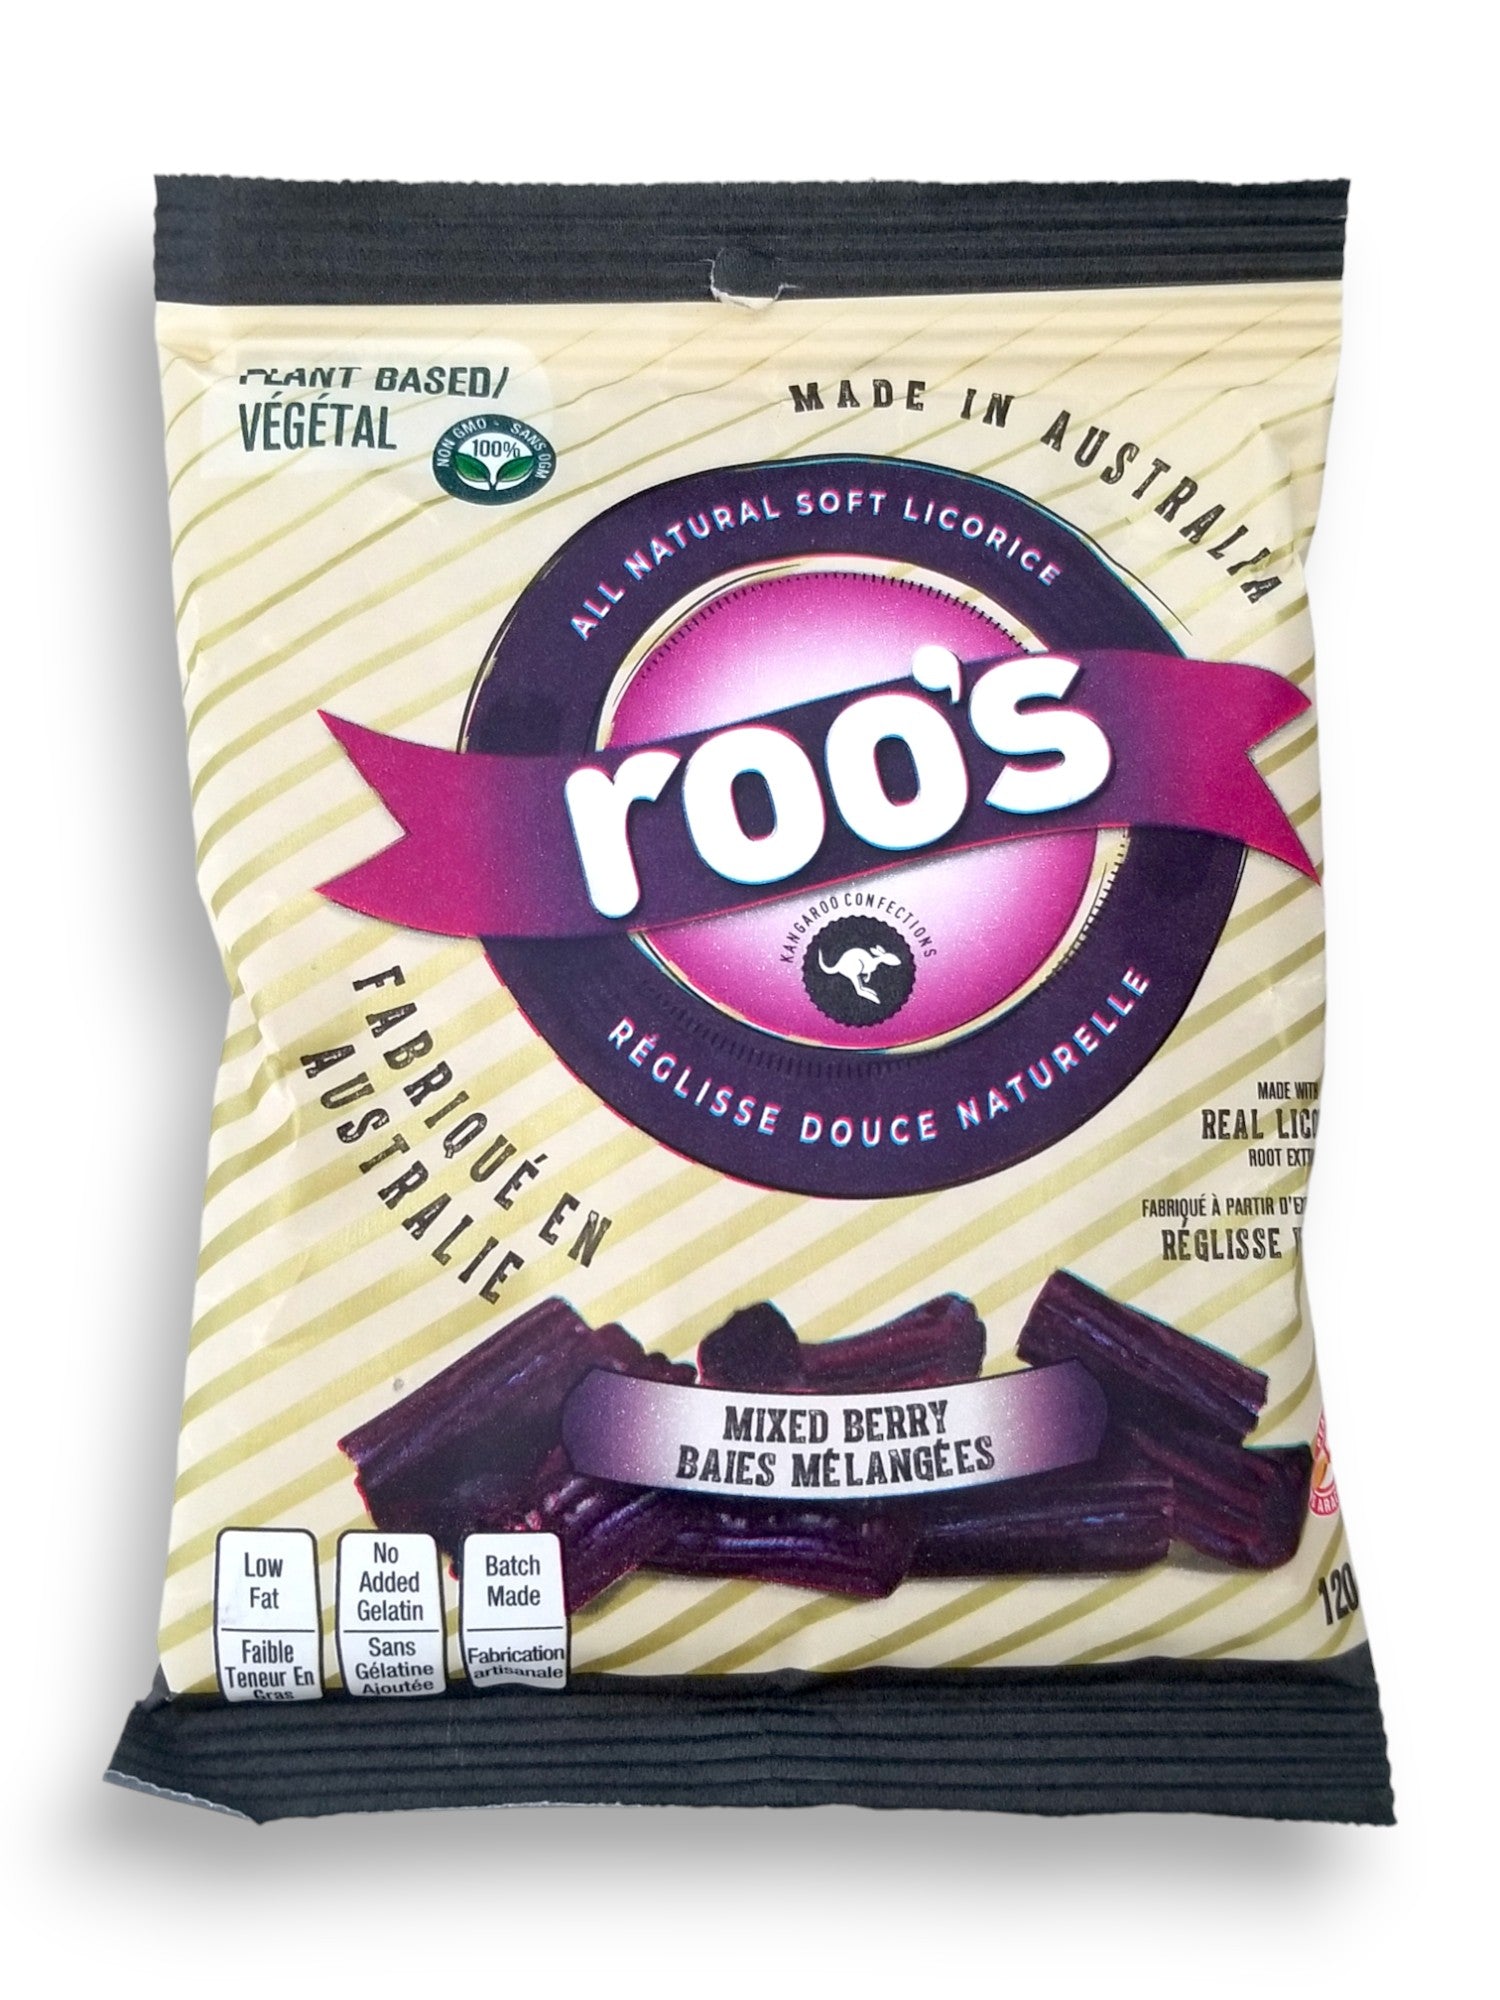 Roo's Australian All Natural Soft Licorice, Mixed Berry Flavor, 120g, front of bag.